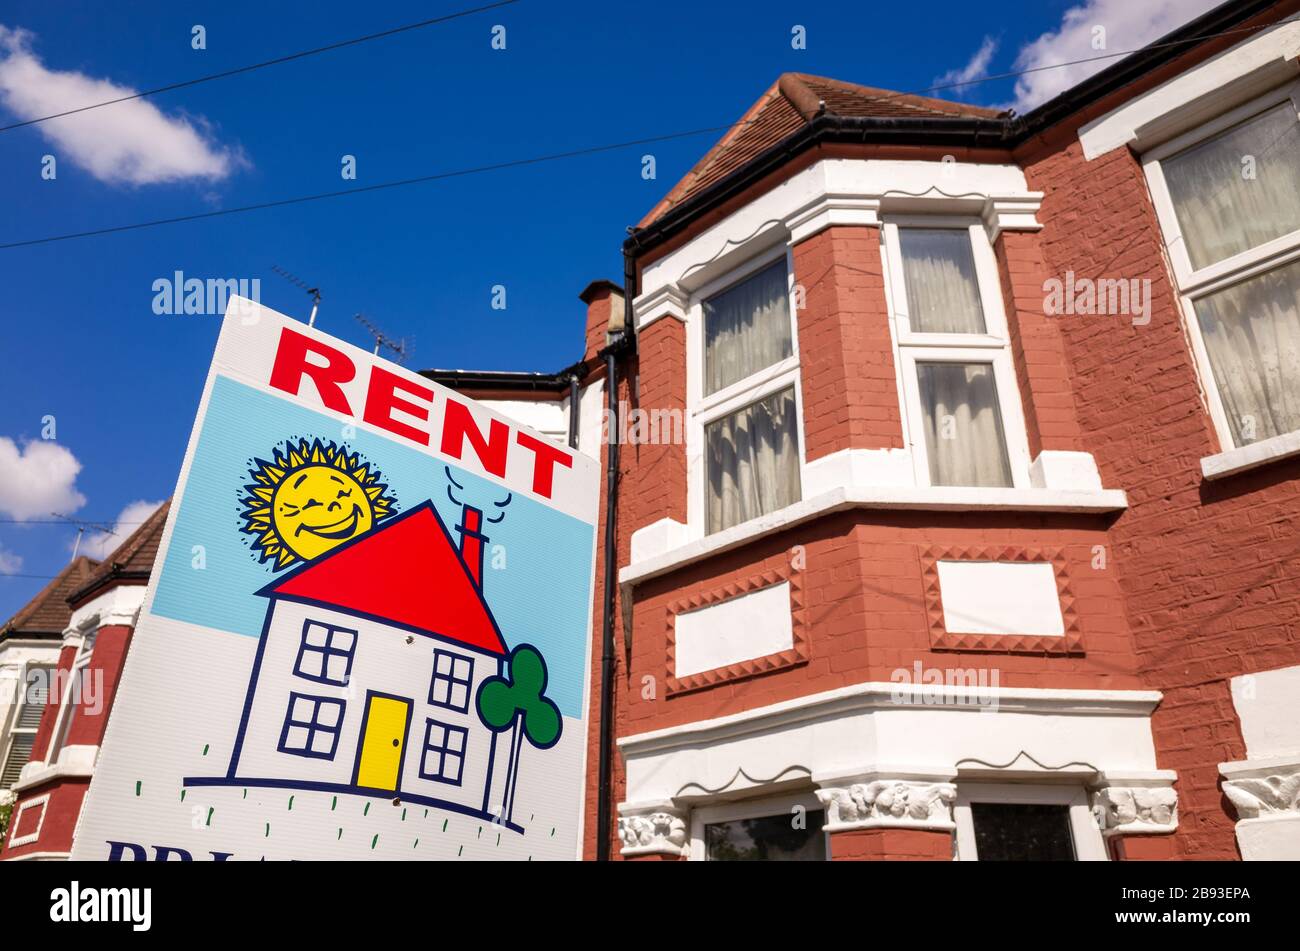 Estate agent rent sign outside terraced house, UK, London Stock Photo